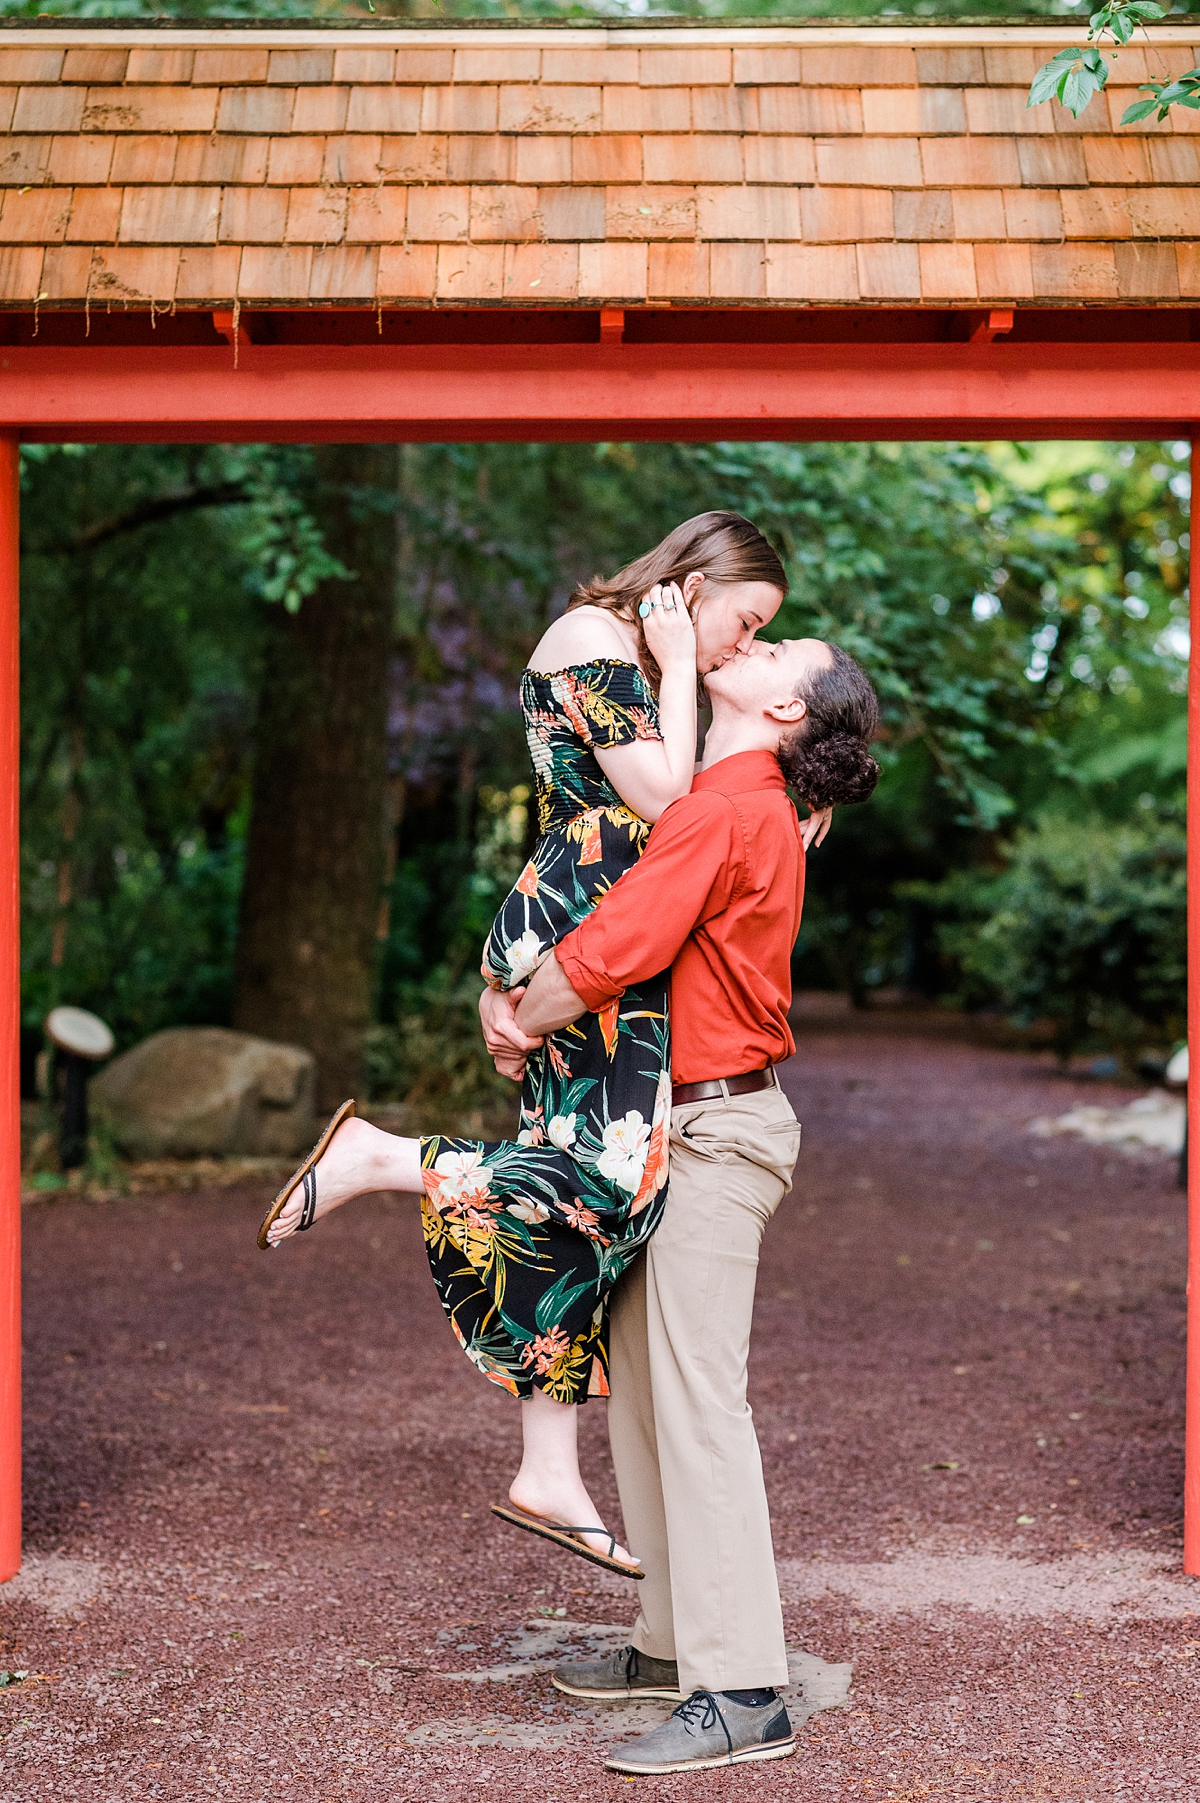 Scissor Kick Kiss during Spring Red Wing Park Engagement Session with blooms. Photography by Virginia Beach Wedding Photographer Kailey Brianne Photography. 